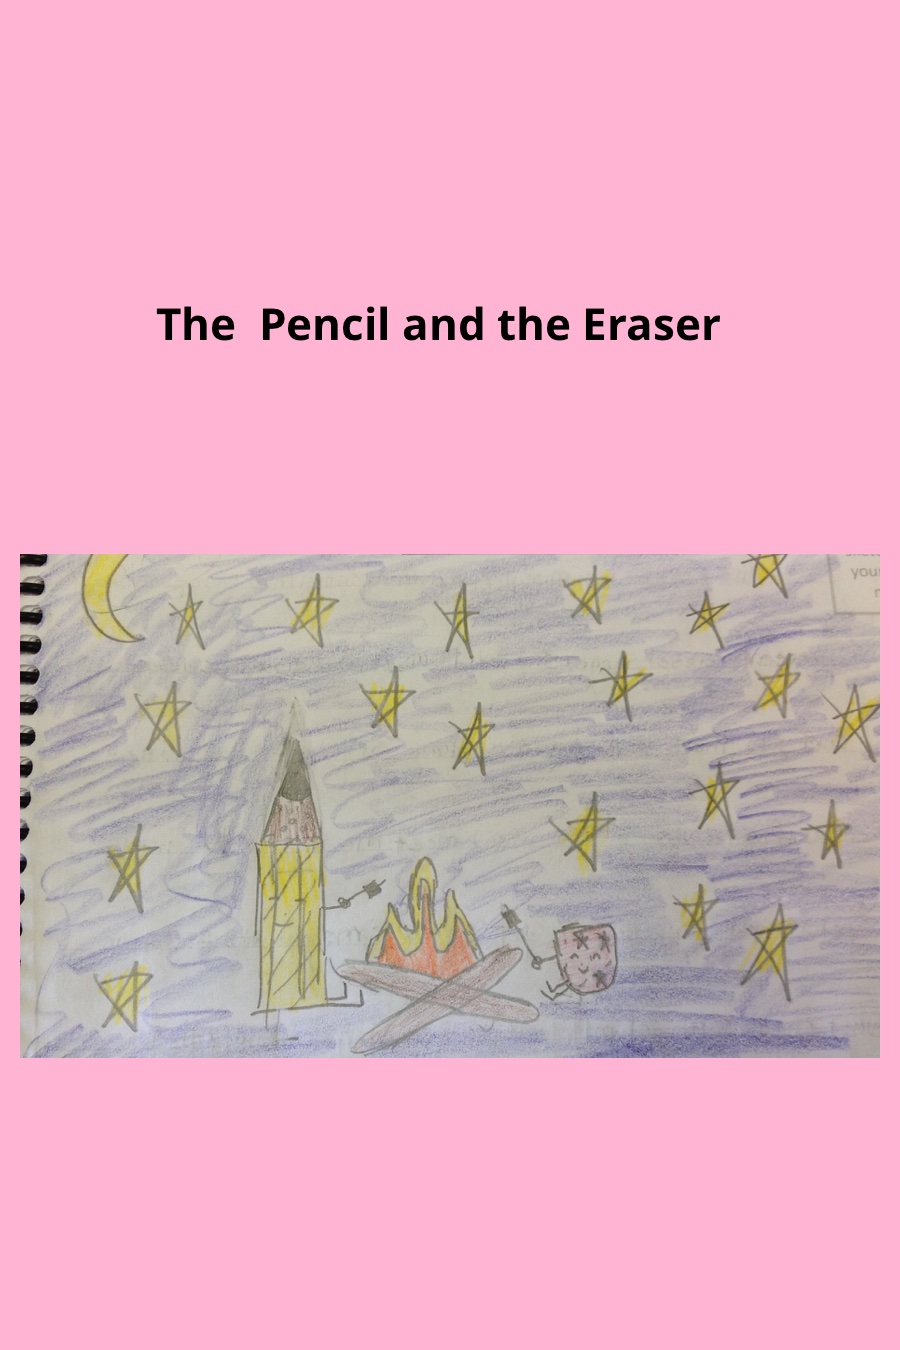 The Pencil and the Eraser written by Jaclyne L